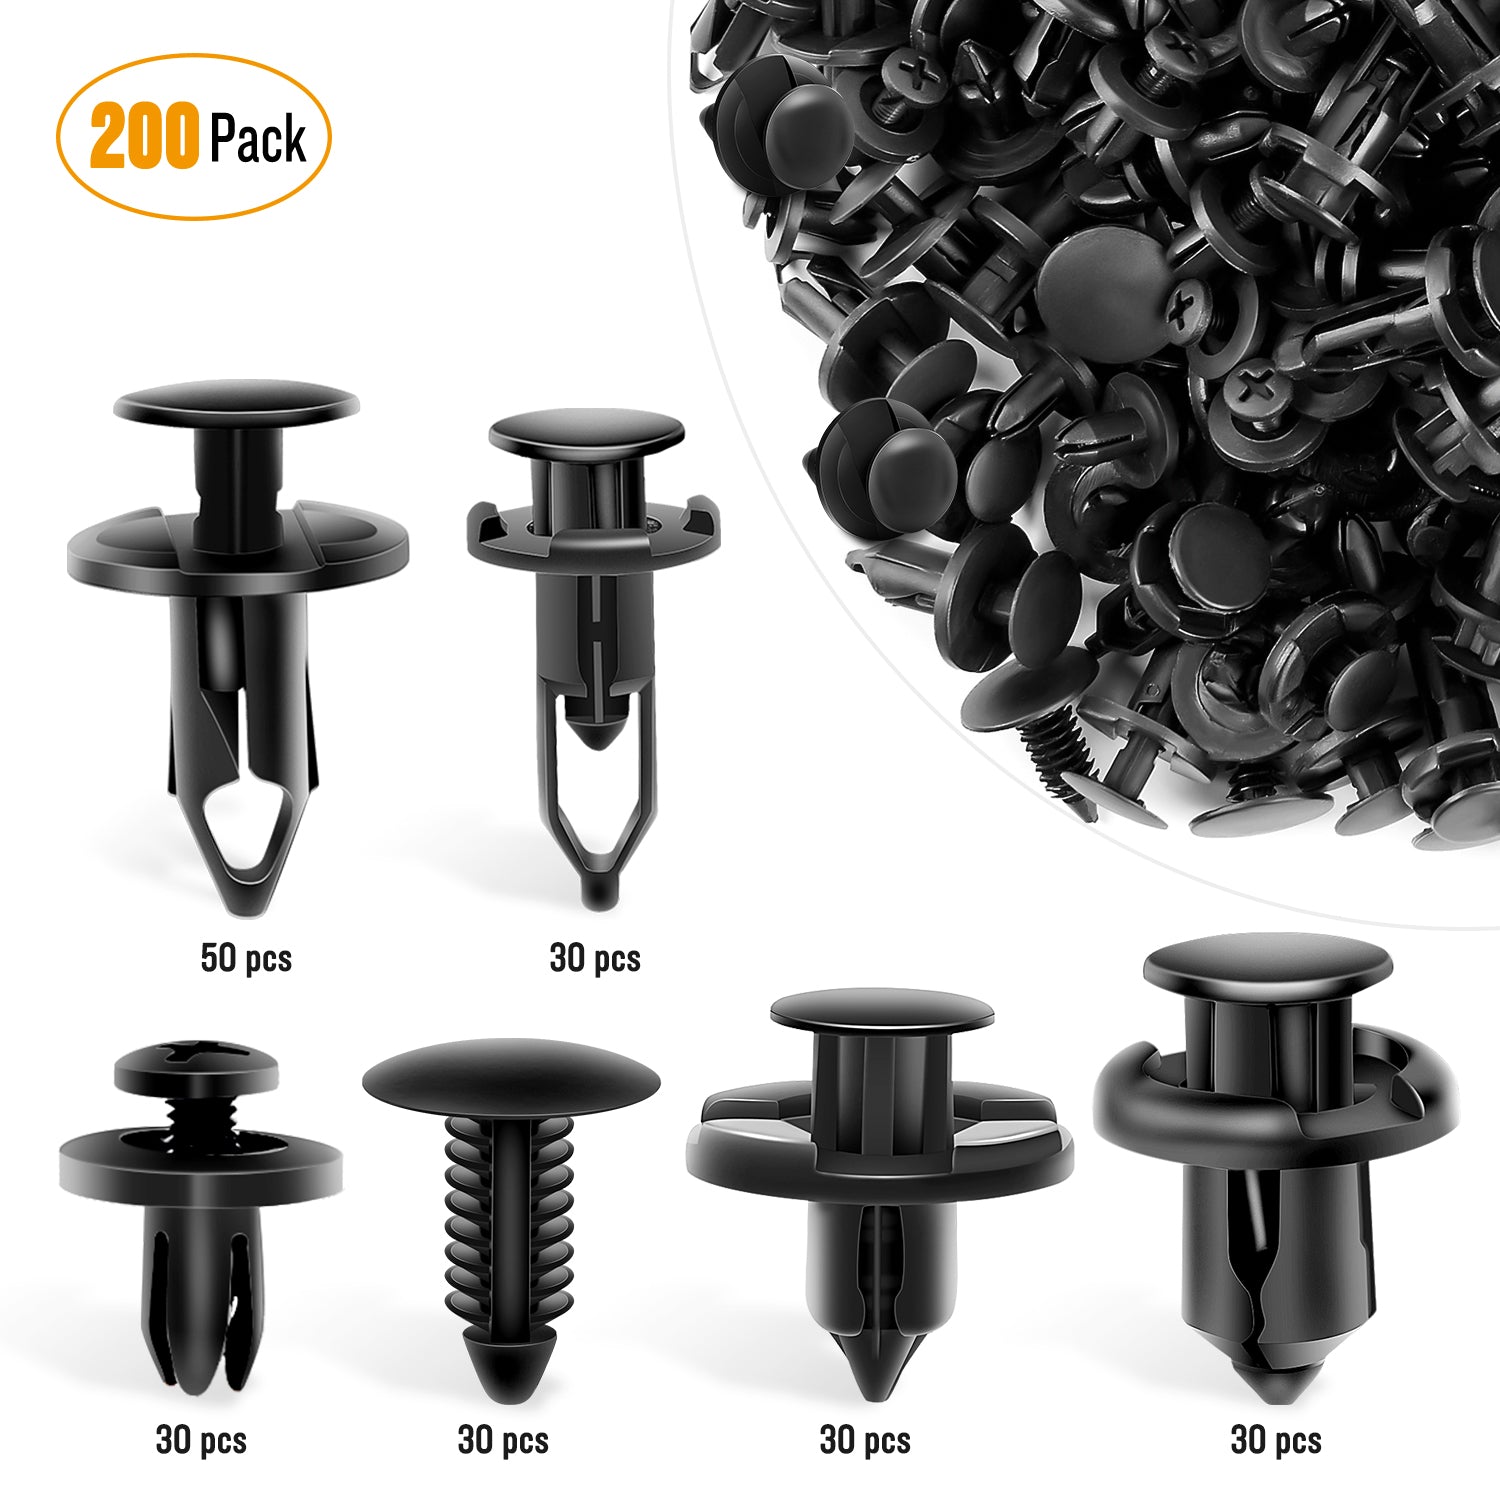 200 Pcs Push Bumper Fastener Rivet Clips with 6 Size Auto Body Retainer Clips Bumpers for GM, Ford & Ch